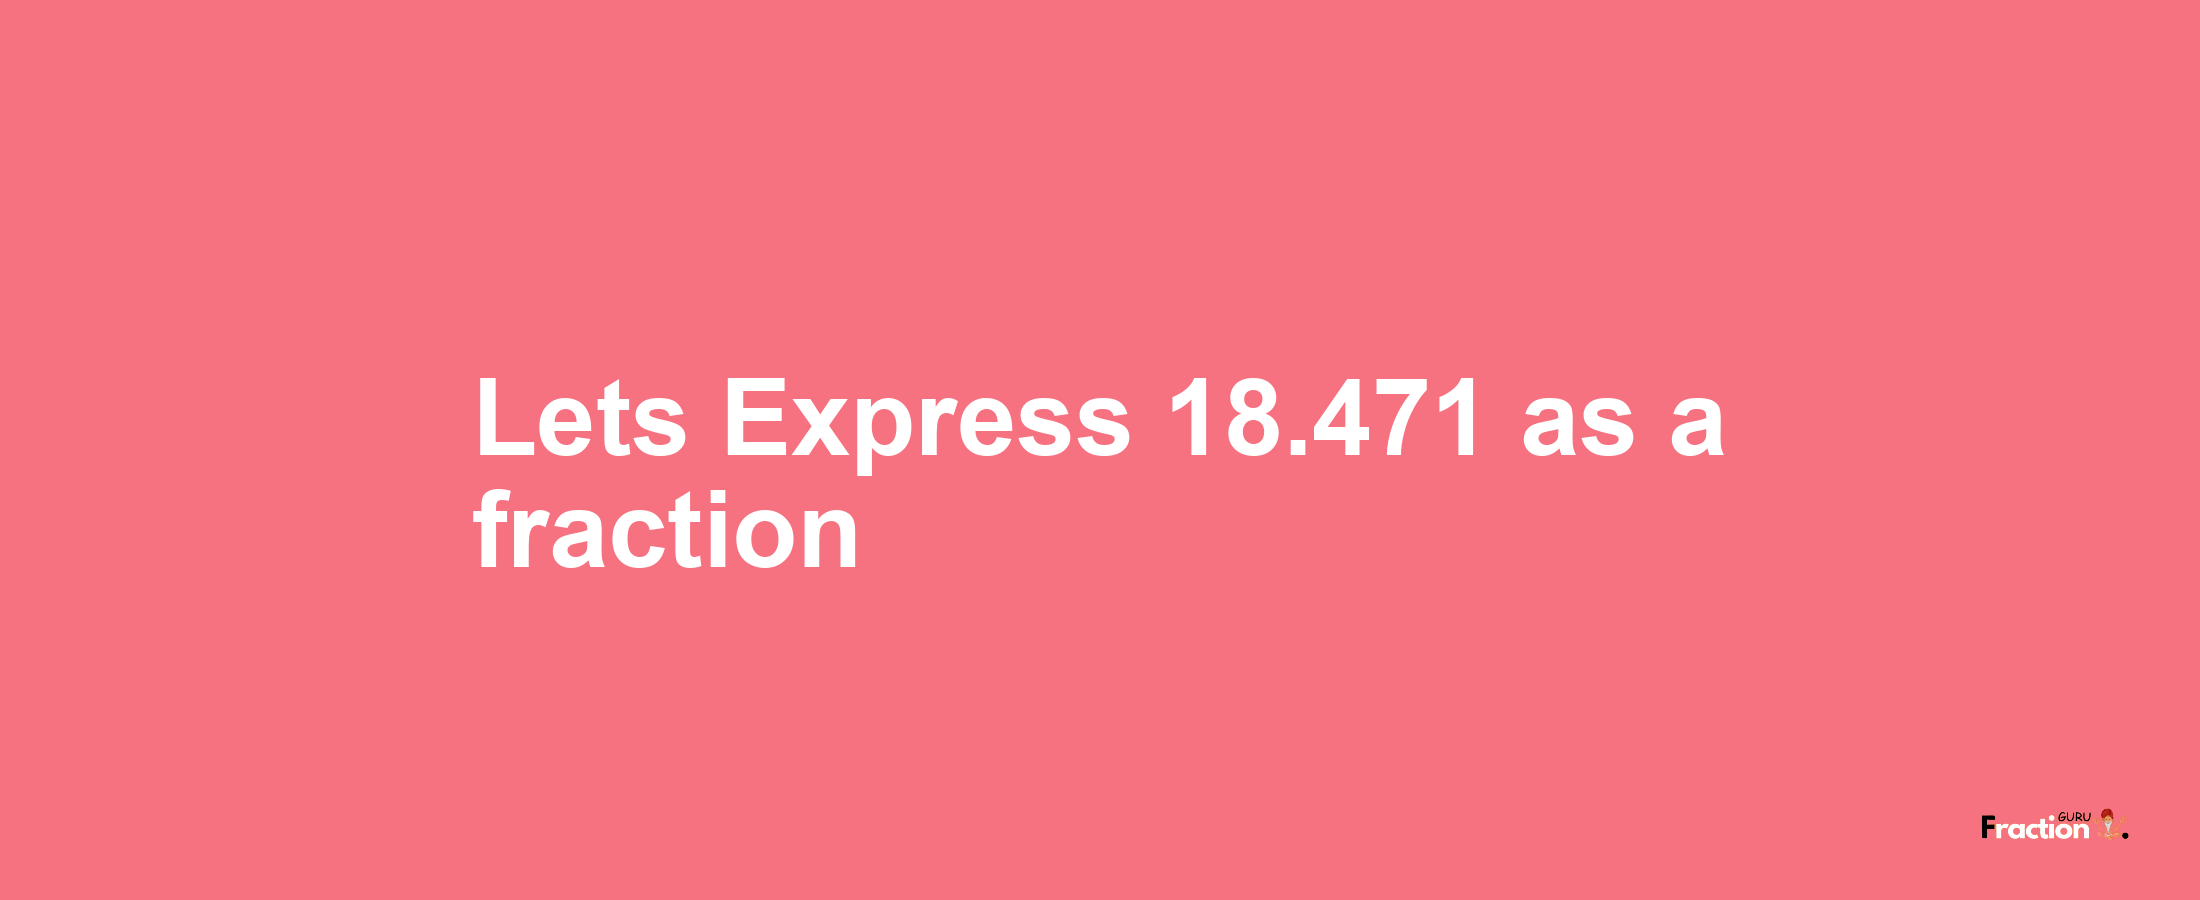 Lets Express 18.471 as afraction